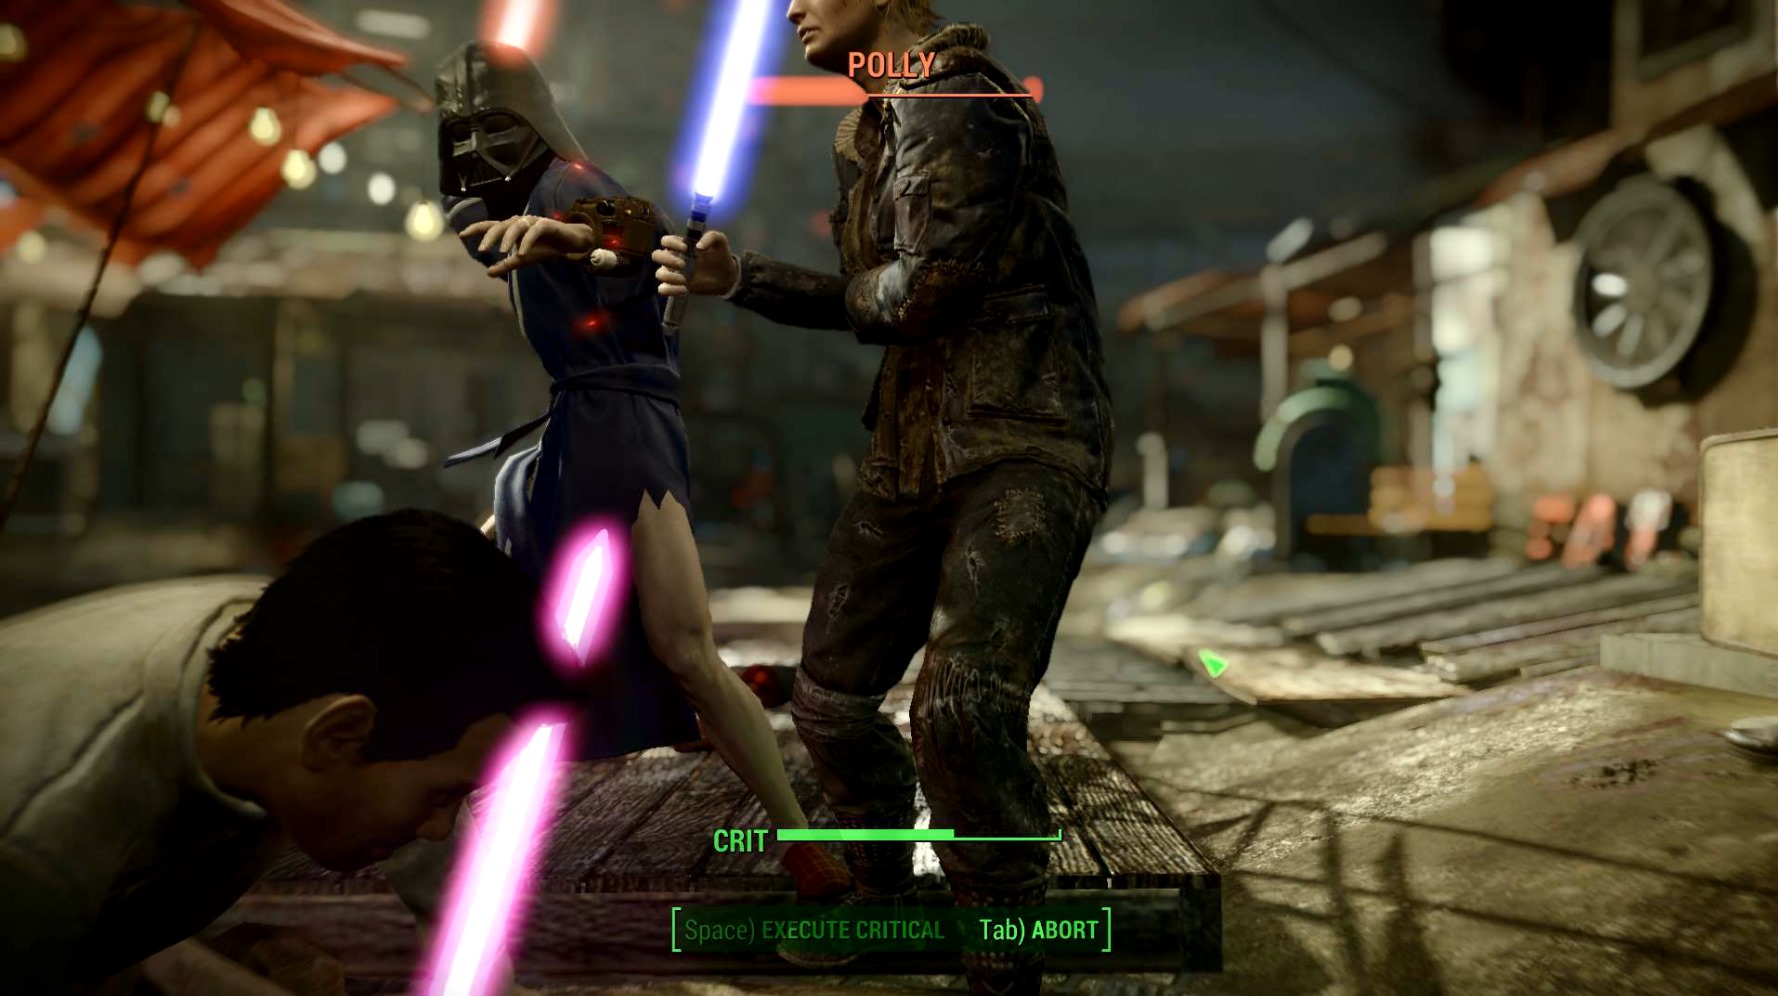 Star wars the lightsaber fallout 4 фото 5